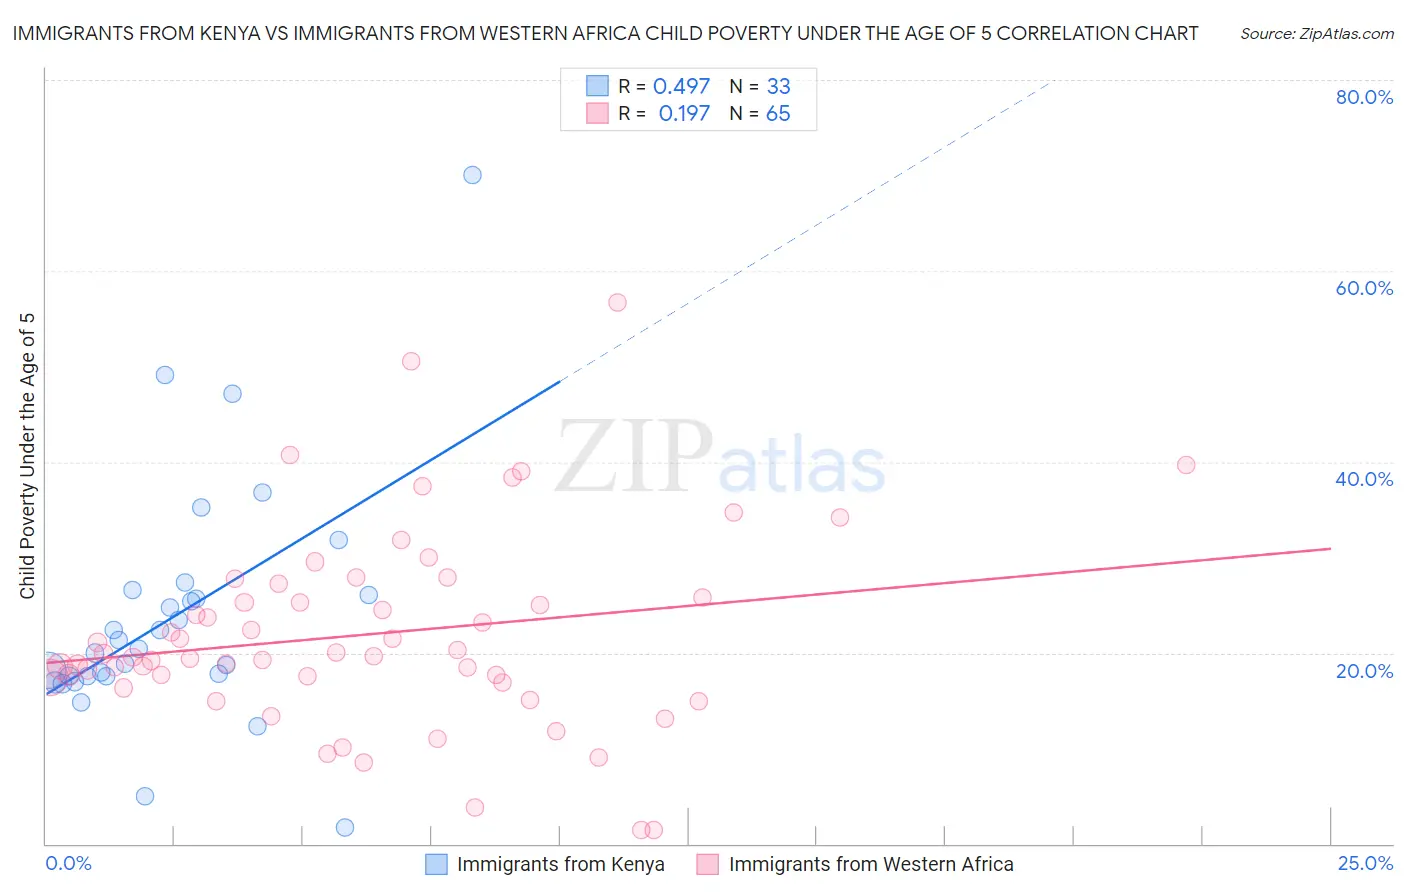 Immigrants from Kenya vs Immigrants from Western Africa Child Poverty Under the Age of 5